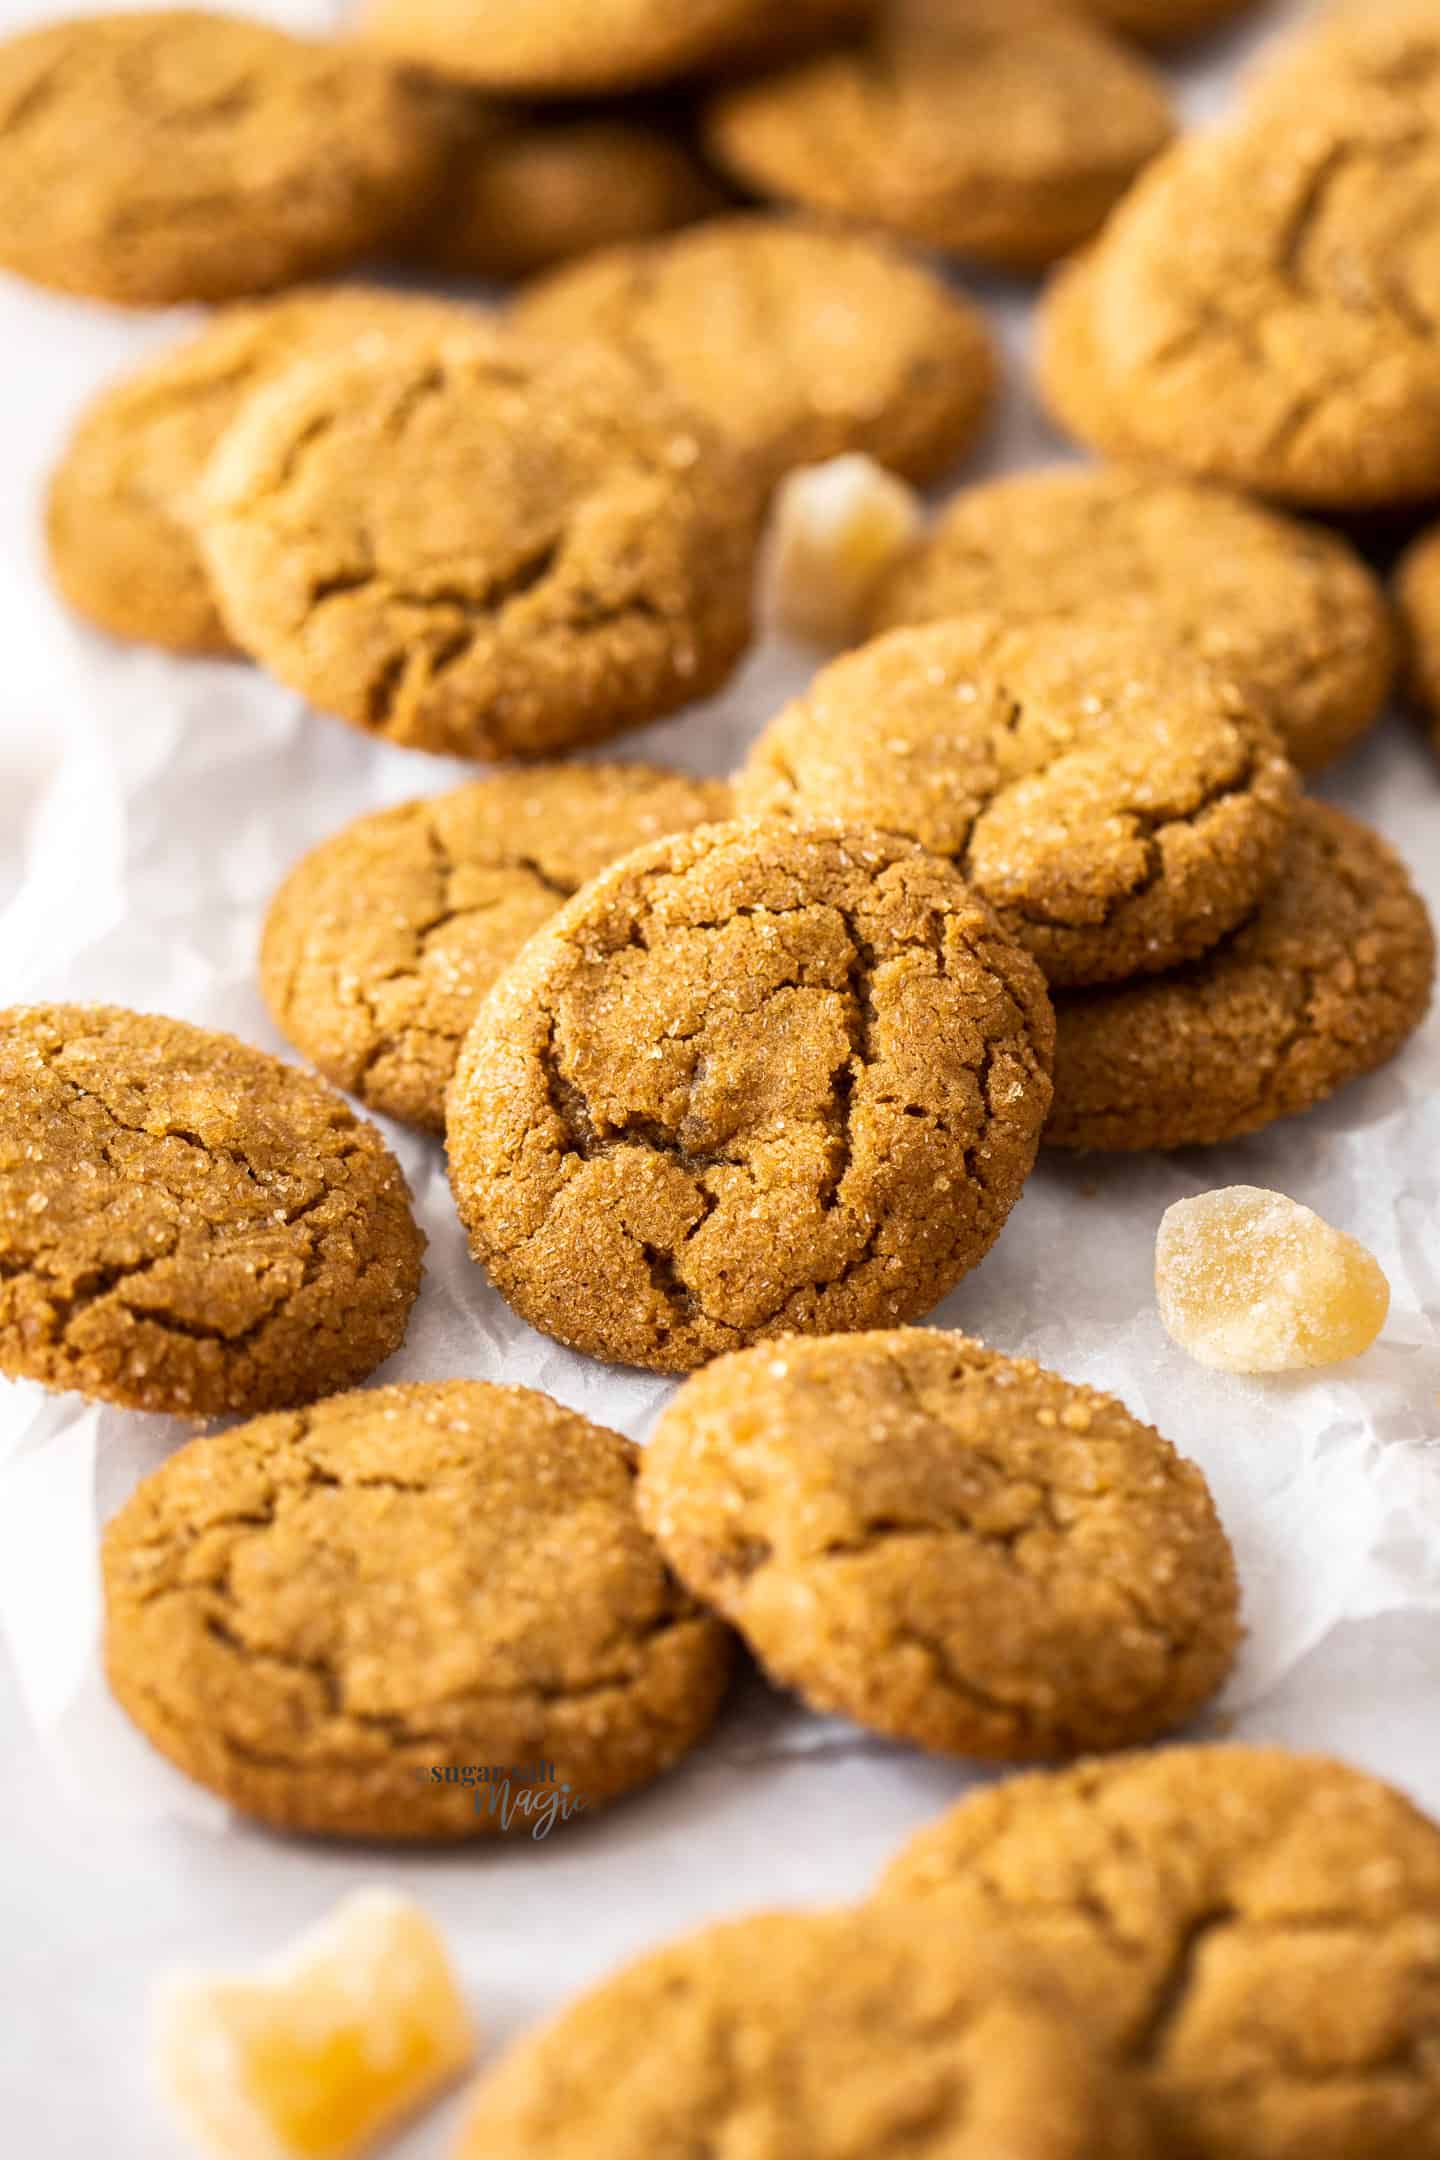 A pile of ginger cookies with pieces of crystallised ginger around.